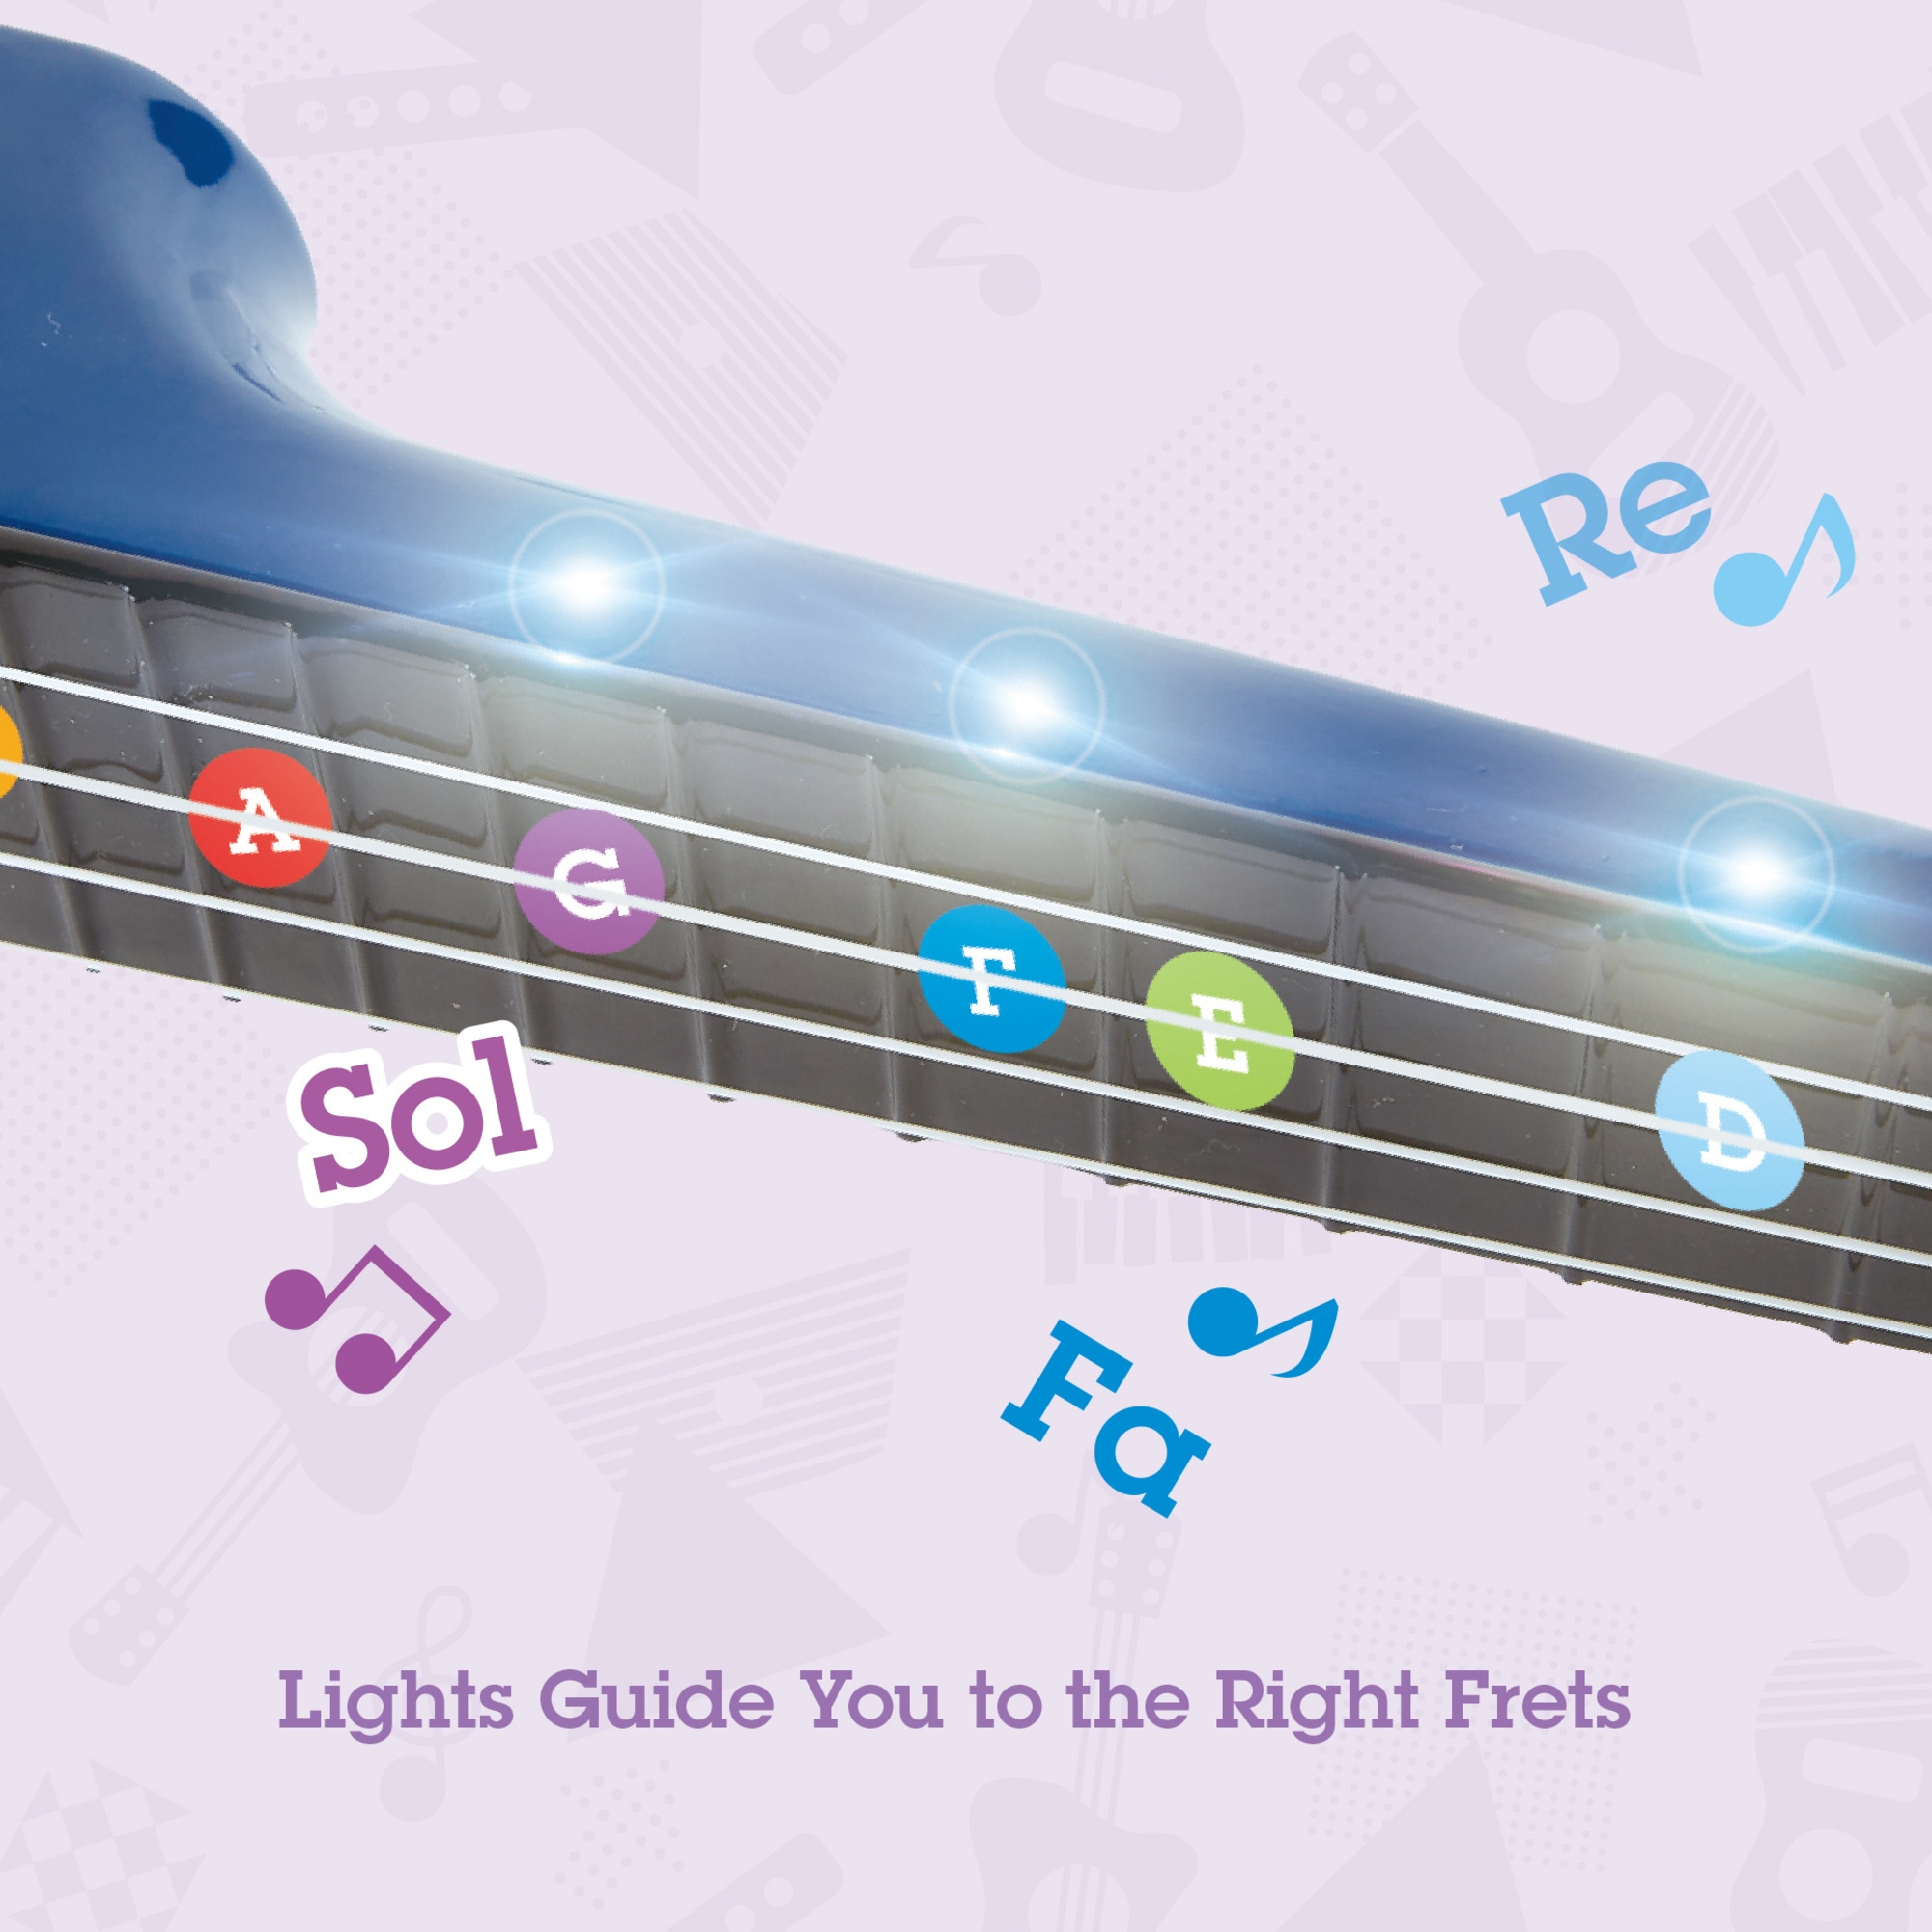 Hape Learn With Lights Kid's Electronic Ukulele in Blue - image 2 of 8